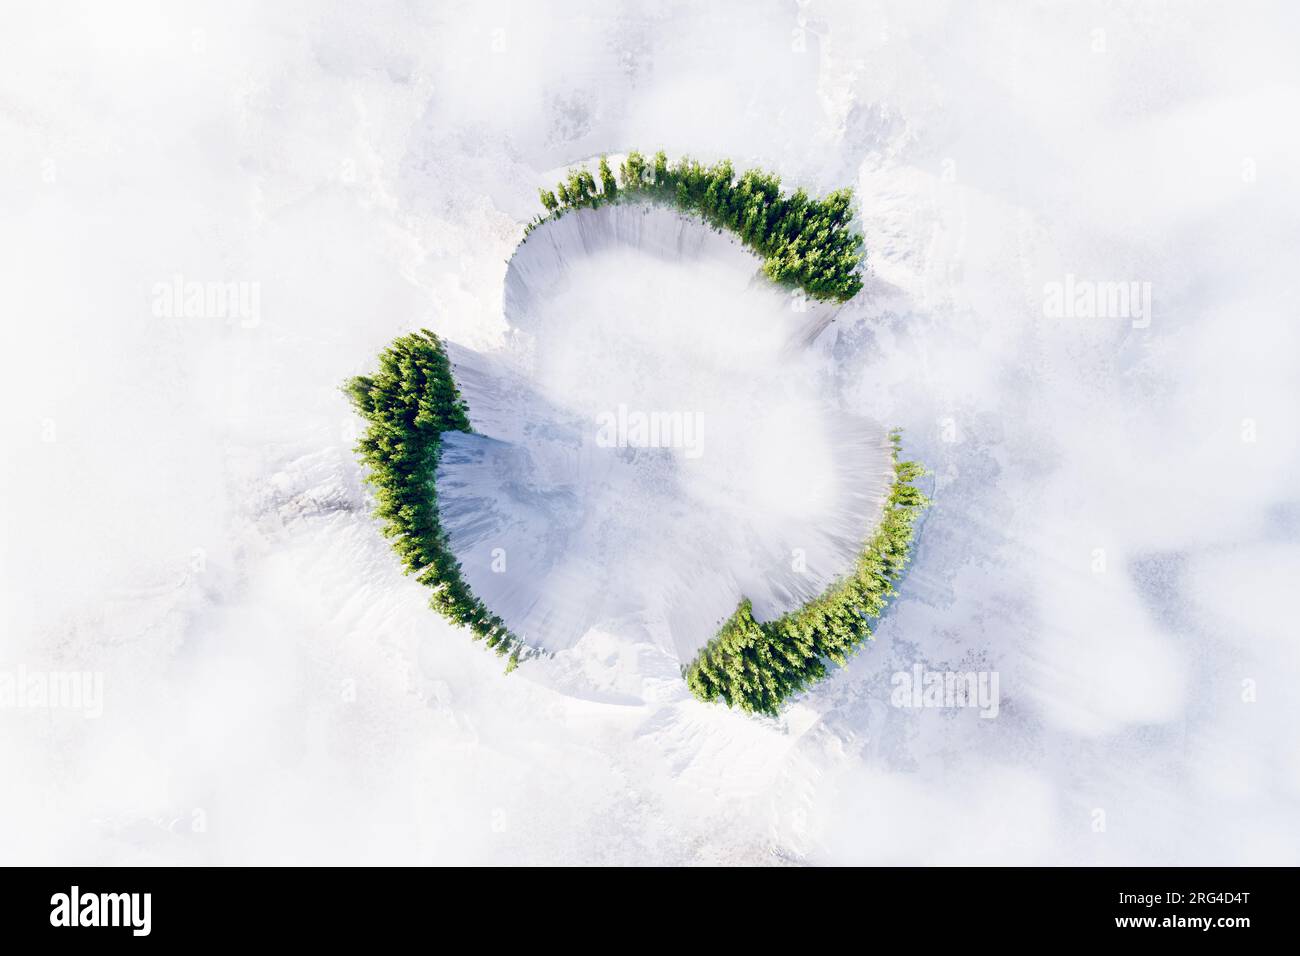 Explore nature's recycling system: mountain range hidden in white clouds shaped like arrows, adorned with trees mimicking their form. Eco-friendly sym Stock Photo